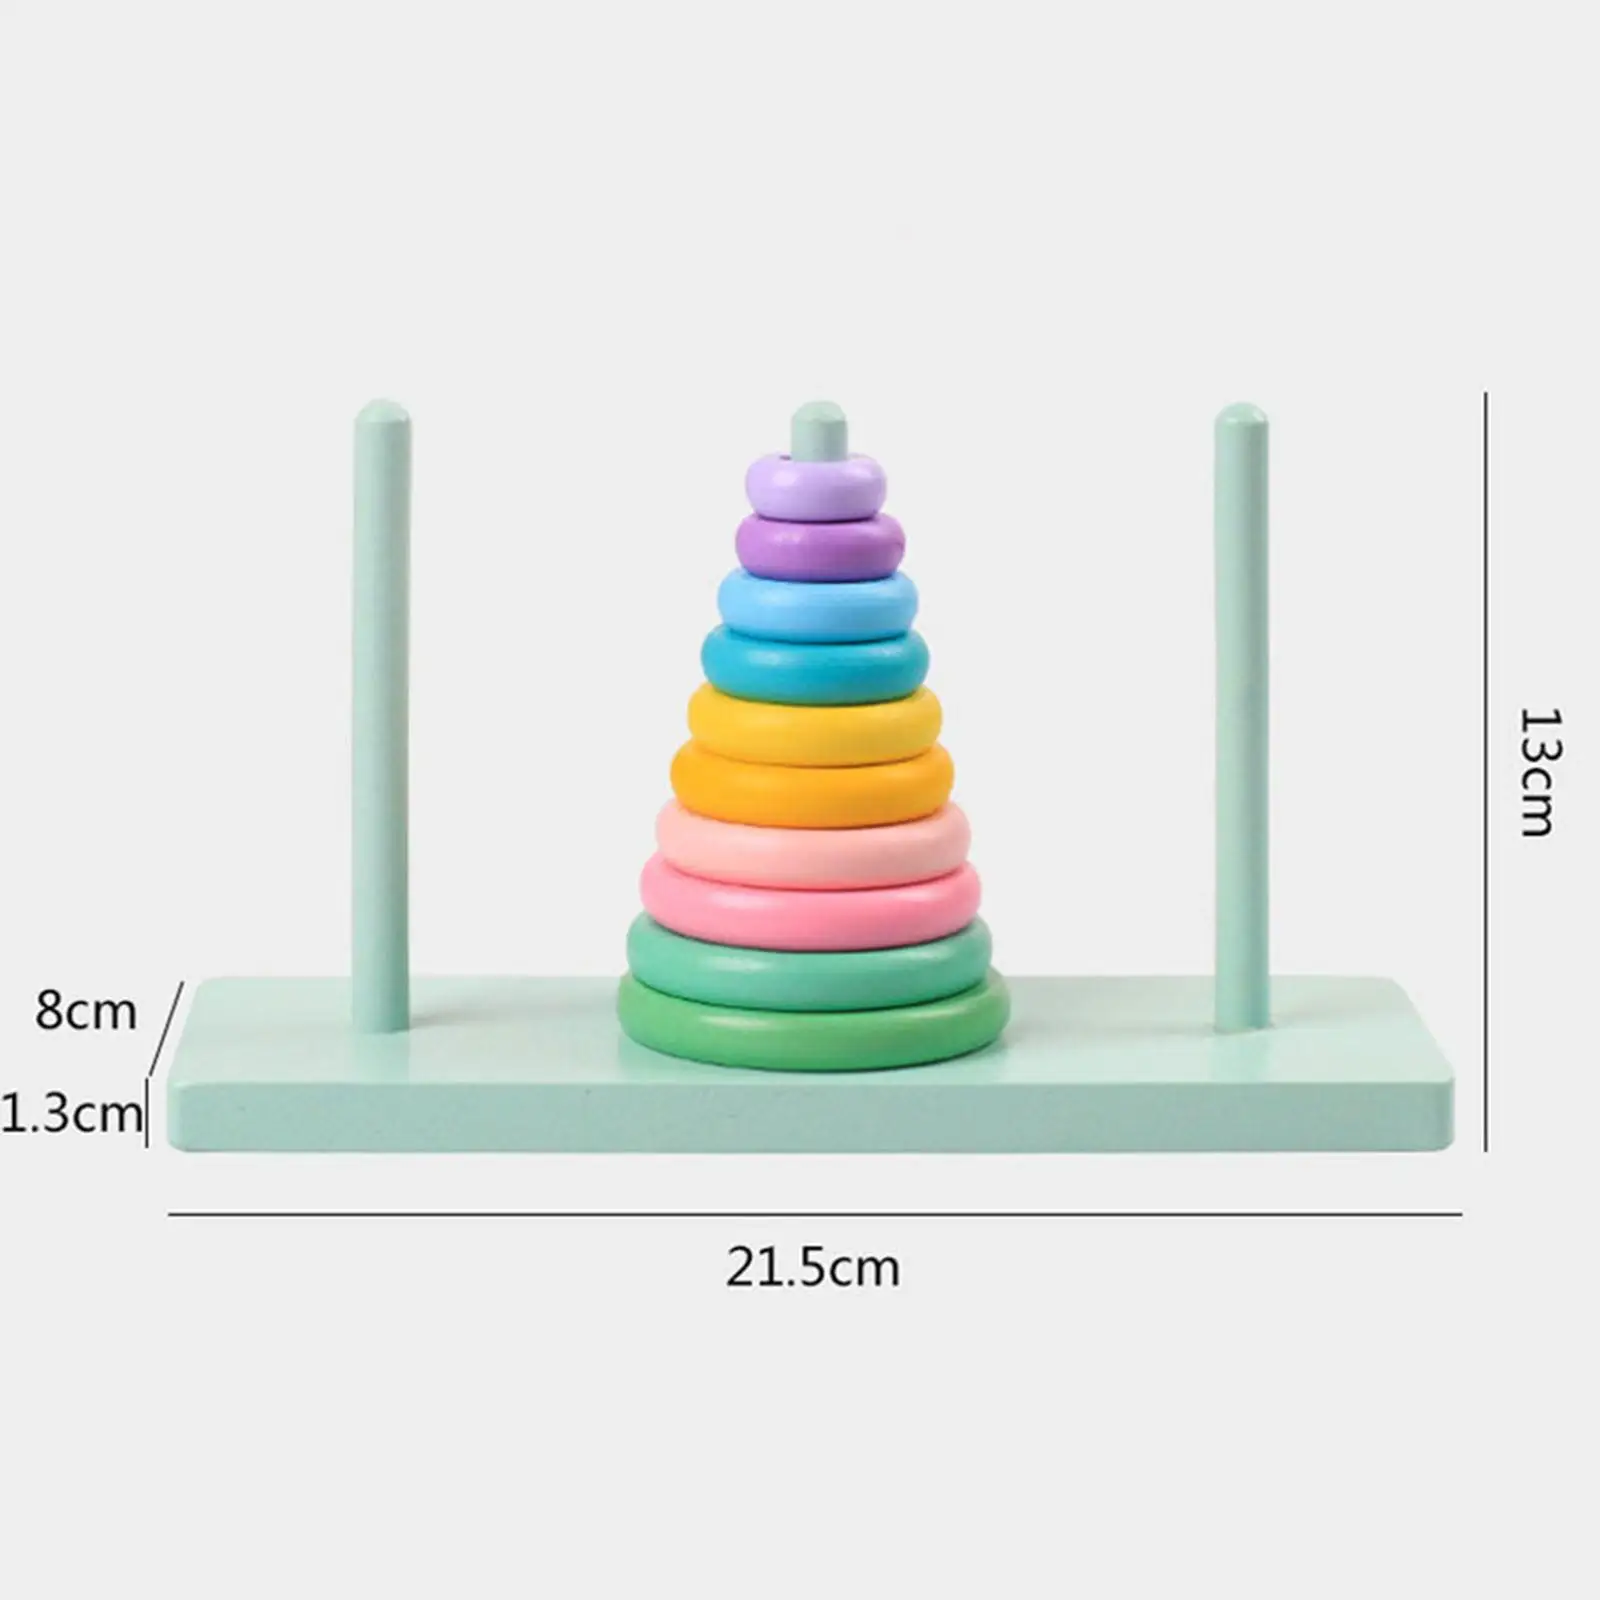 Wooden Stacking Rings Toy Intellectual Toy Sensory Toy Montessori Toy for Infant Ages 6+ Months Boy Girls Kids Birthday Gift